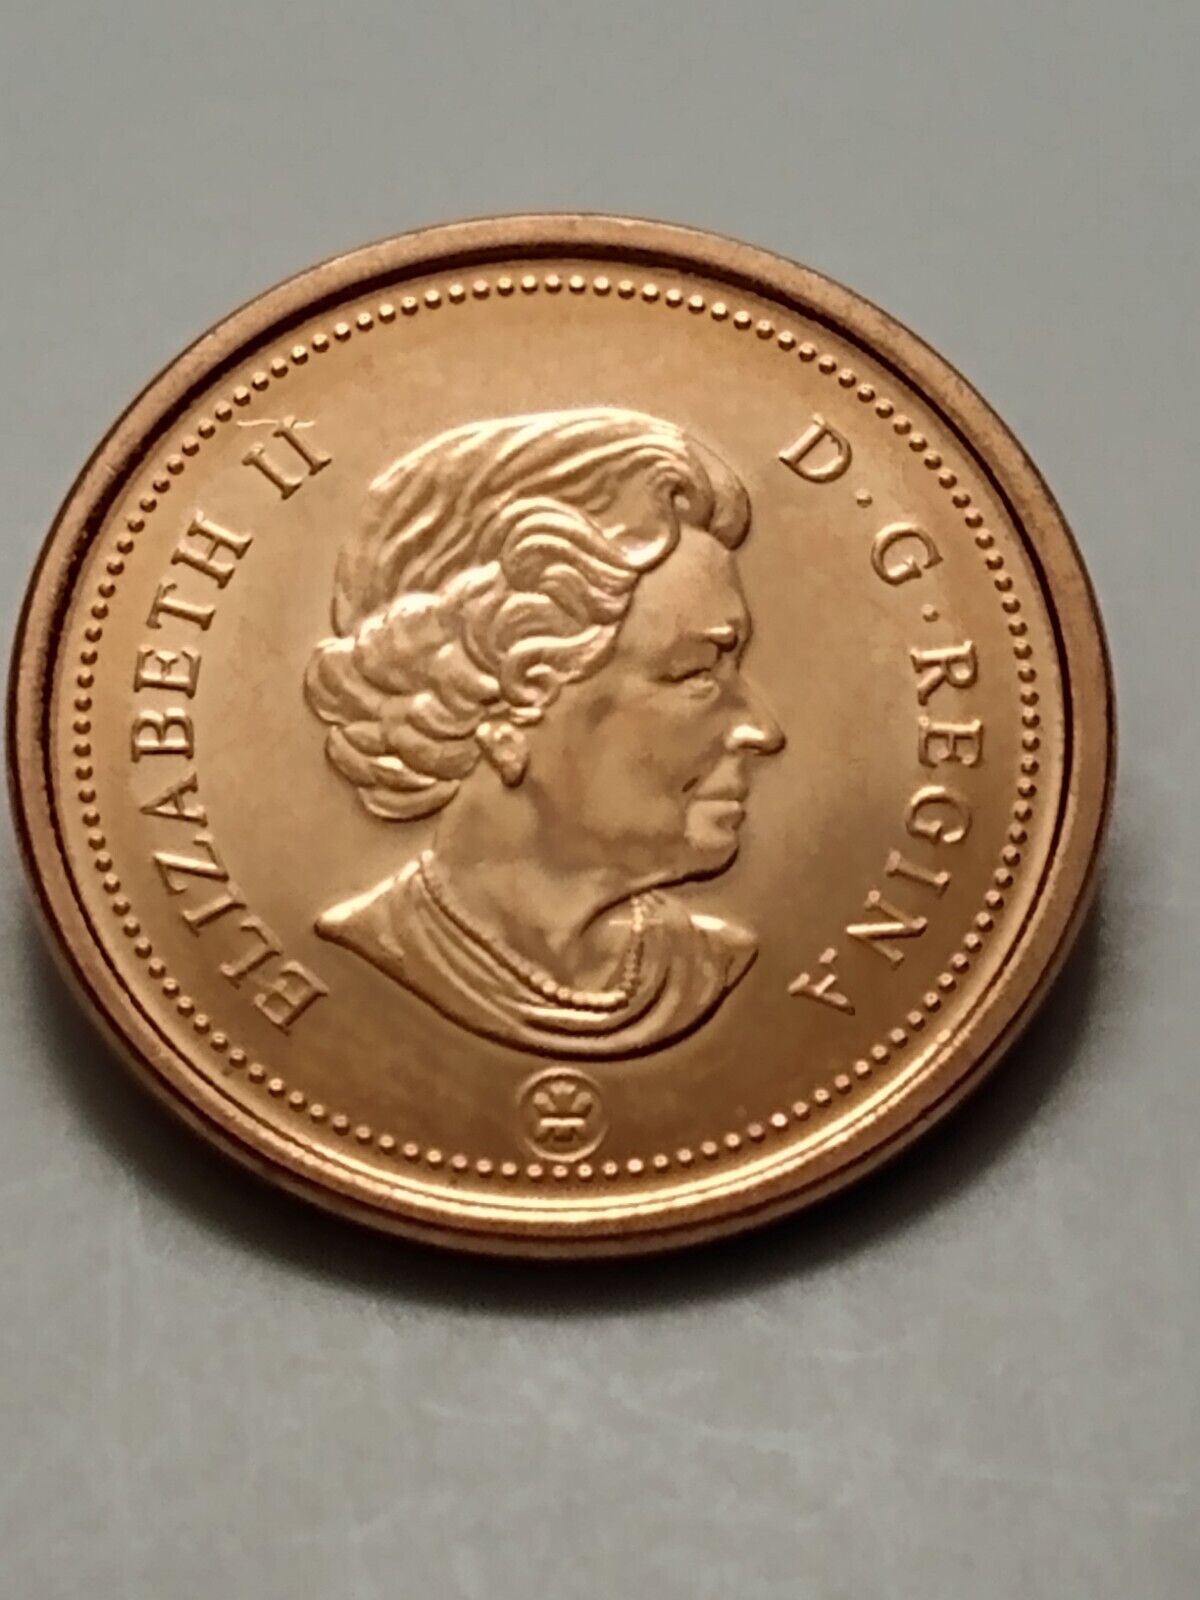 2009 LOGO - CANADA - BU - 1 ONE CENT - PENNY - BRILLIANT UNCIRCULATED - MAGNETIC